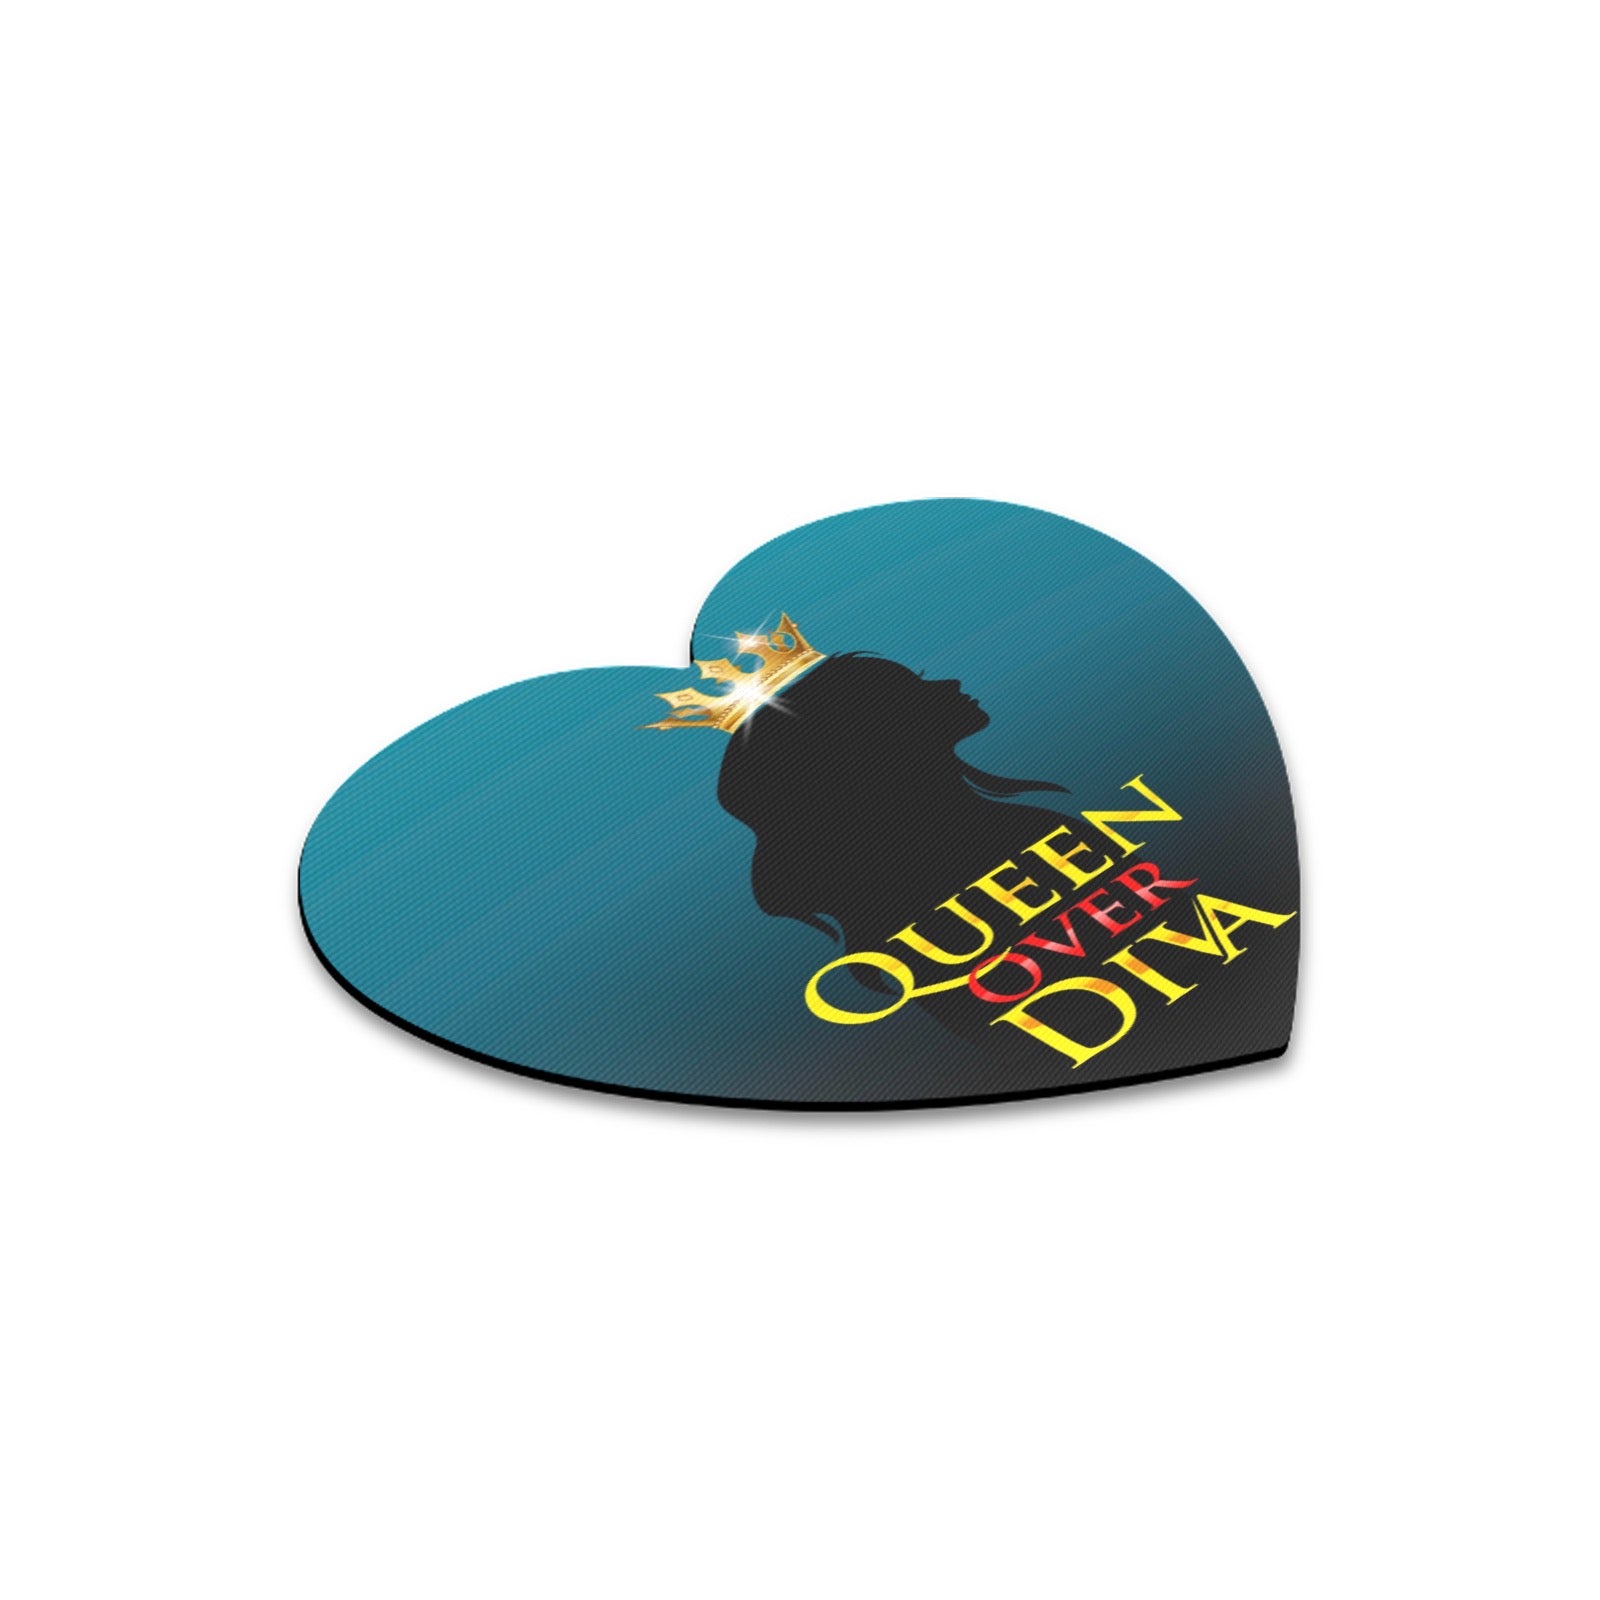 Heart-shaped Mousepad (Made In USA)